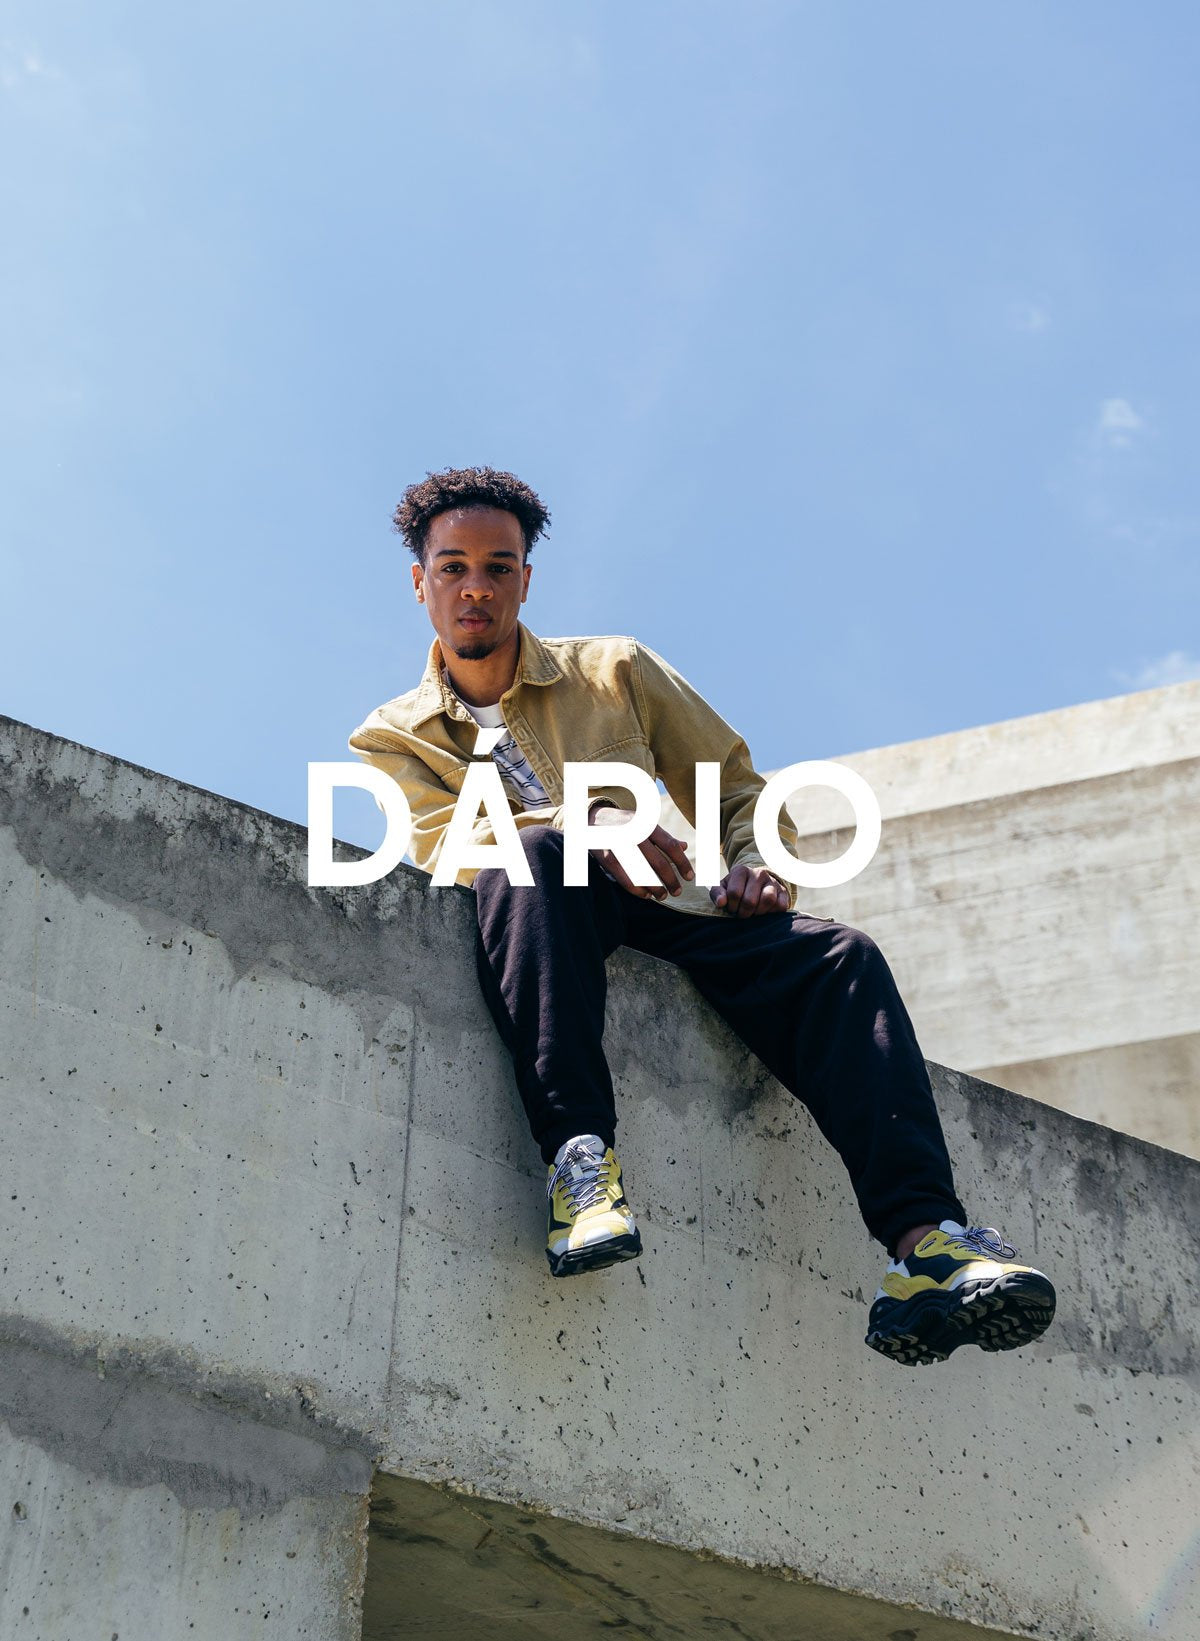 Dário sitting on a wall wearing Diverge sneakers, promoving social impact and custom shoes throught the imagine project.